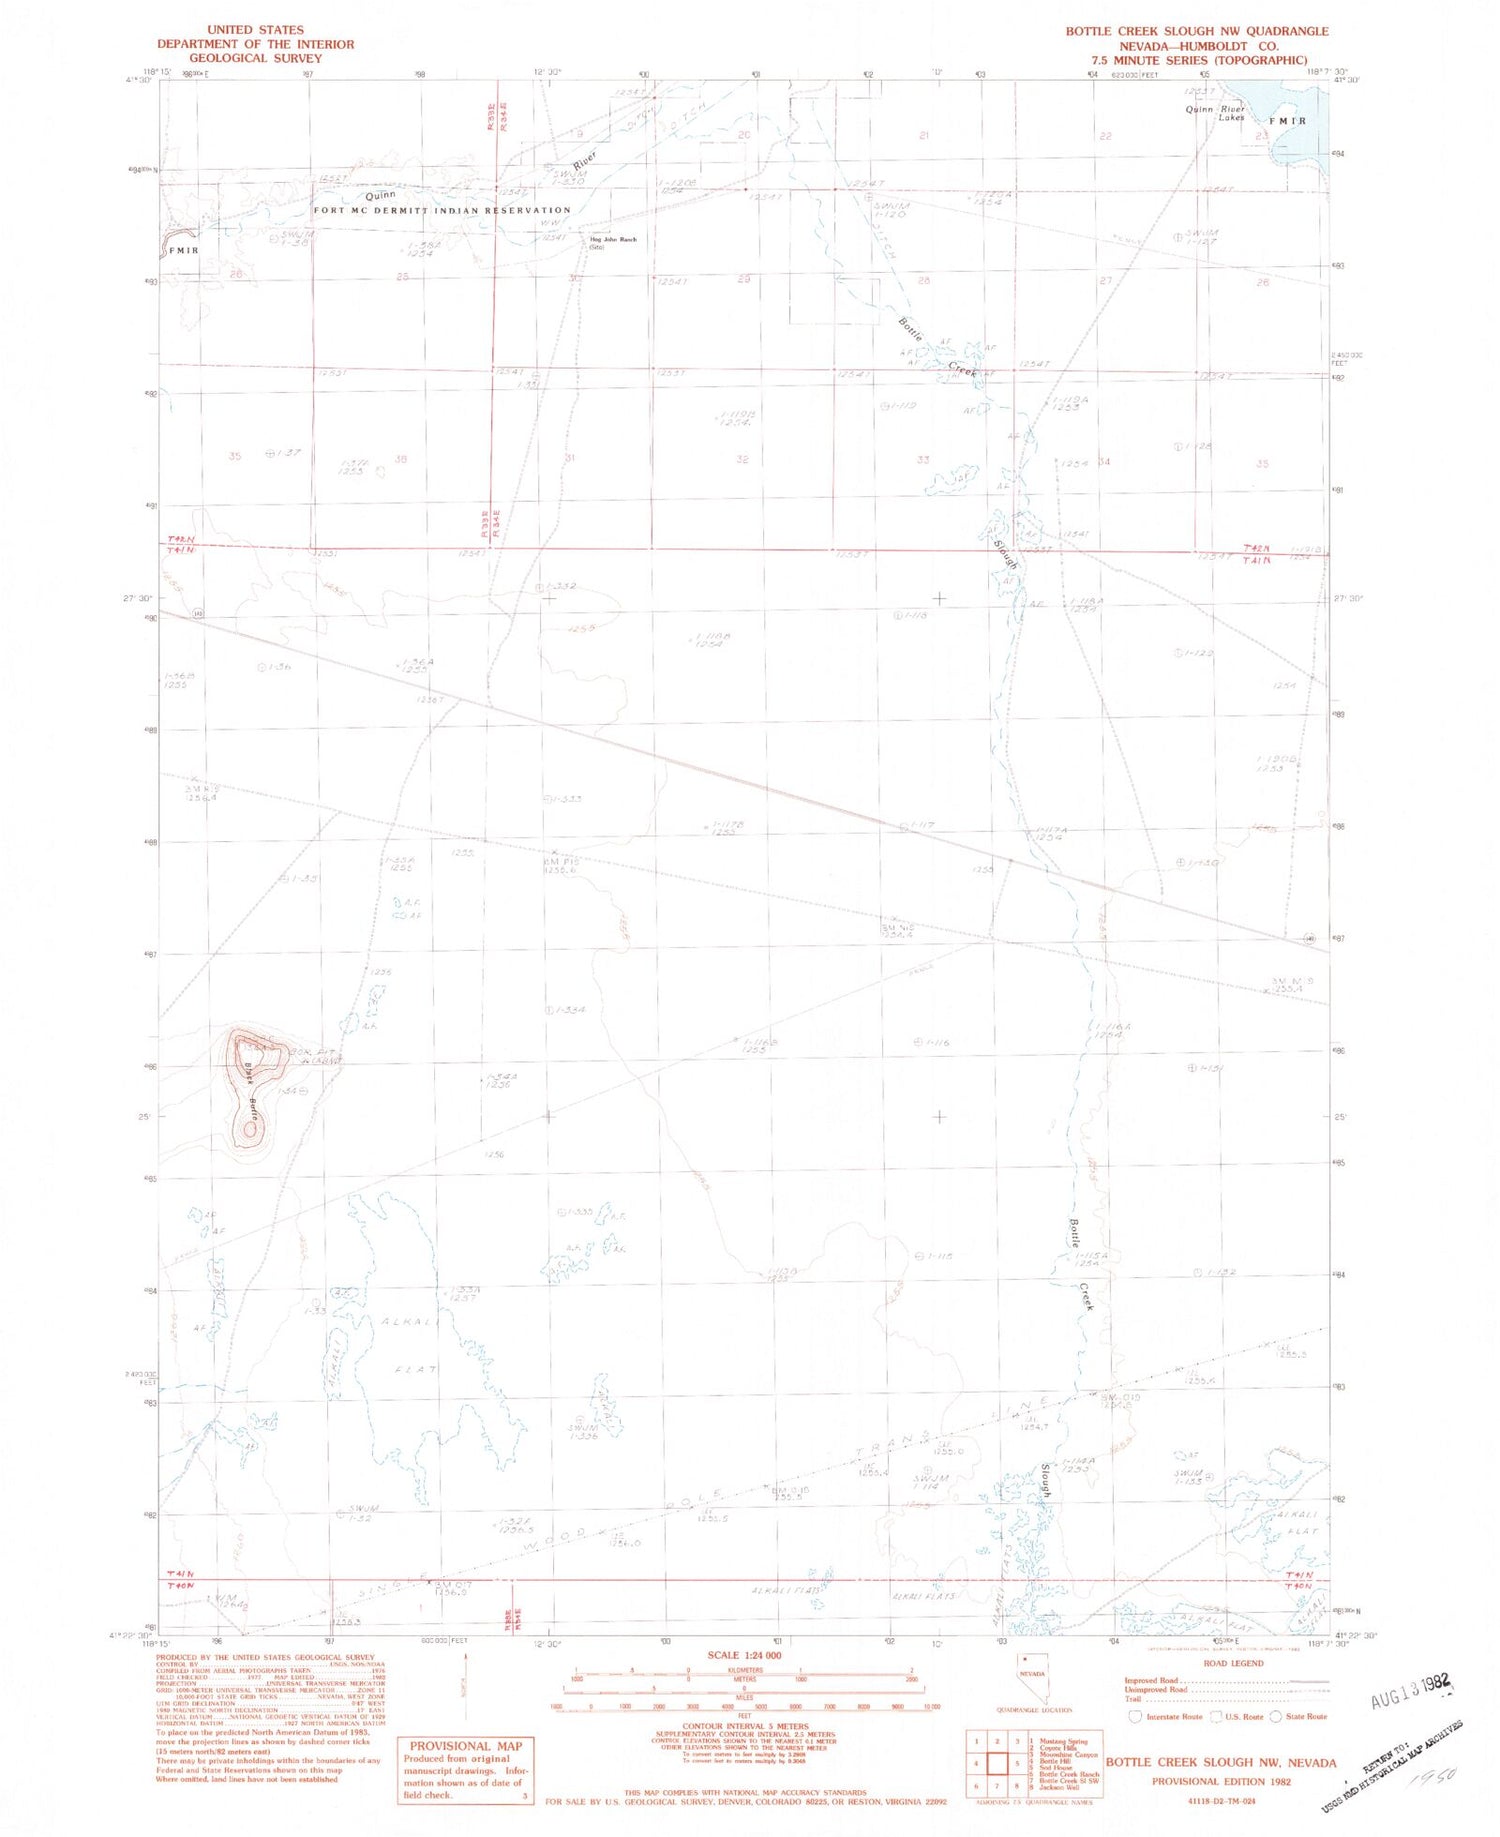 Classic USGS Bottle Creek Slough NW Nevada 7.5'x7.5' Topo Map Image